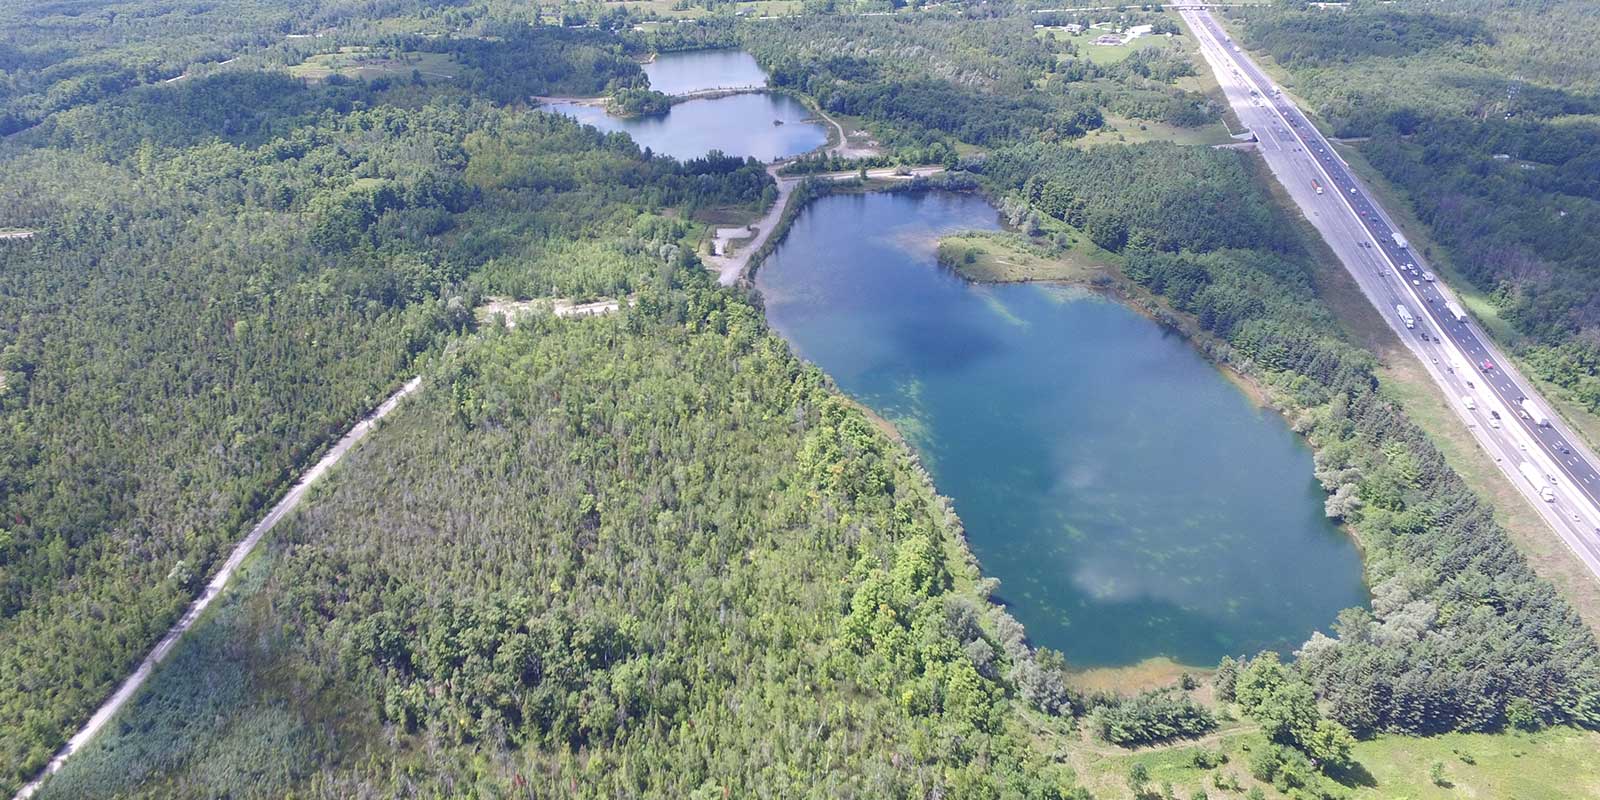 Aerial image of the area where the Campbellville Quarry could be built